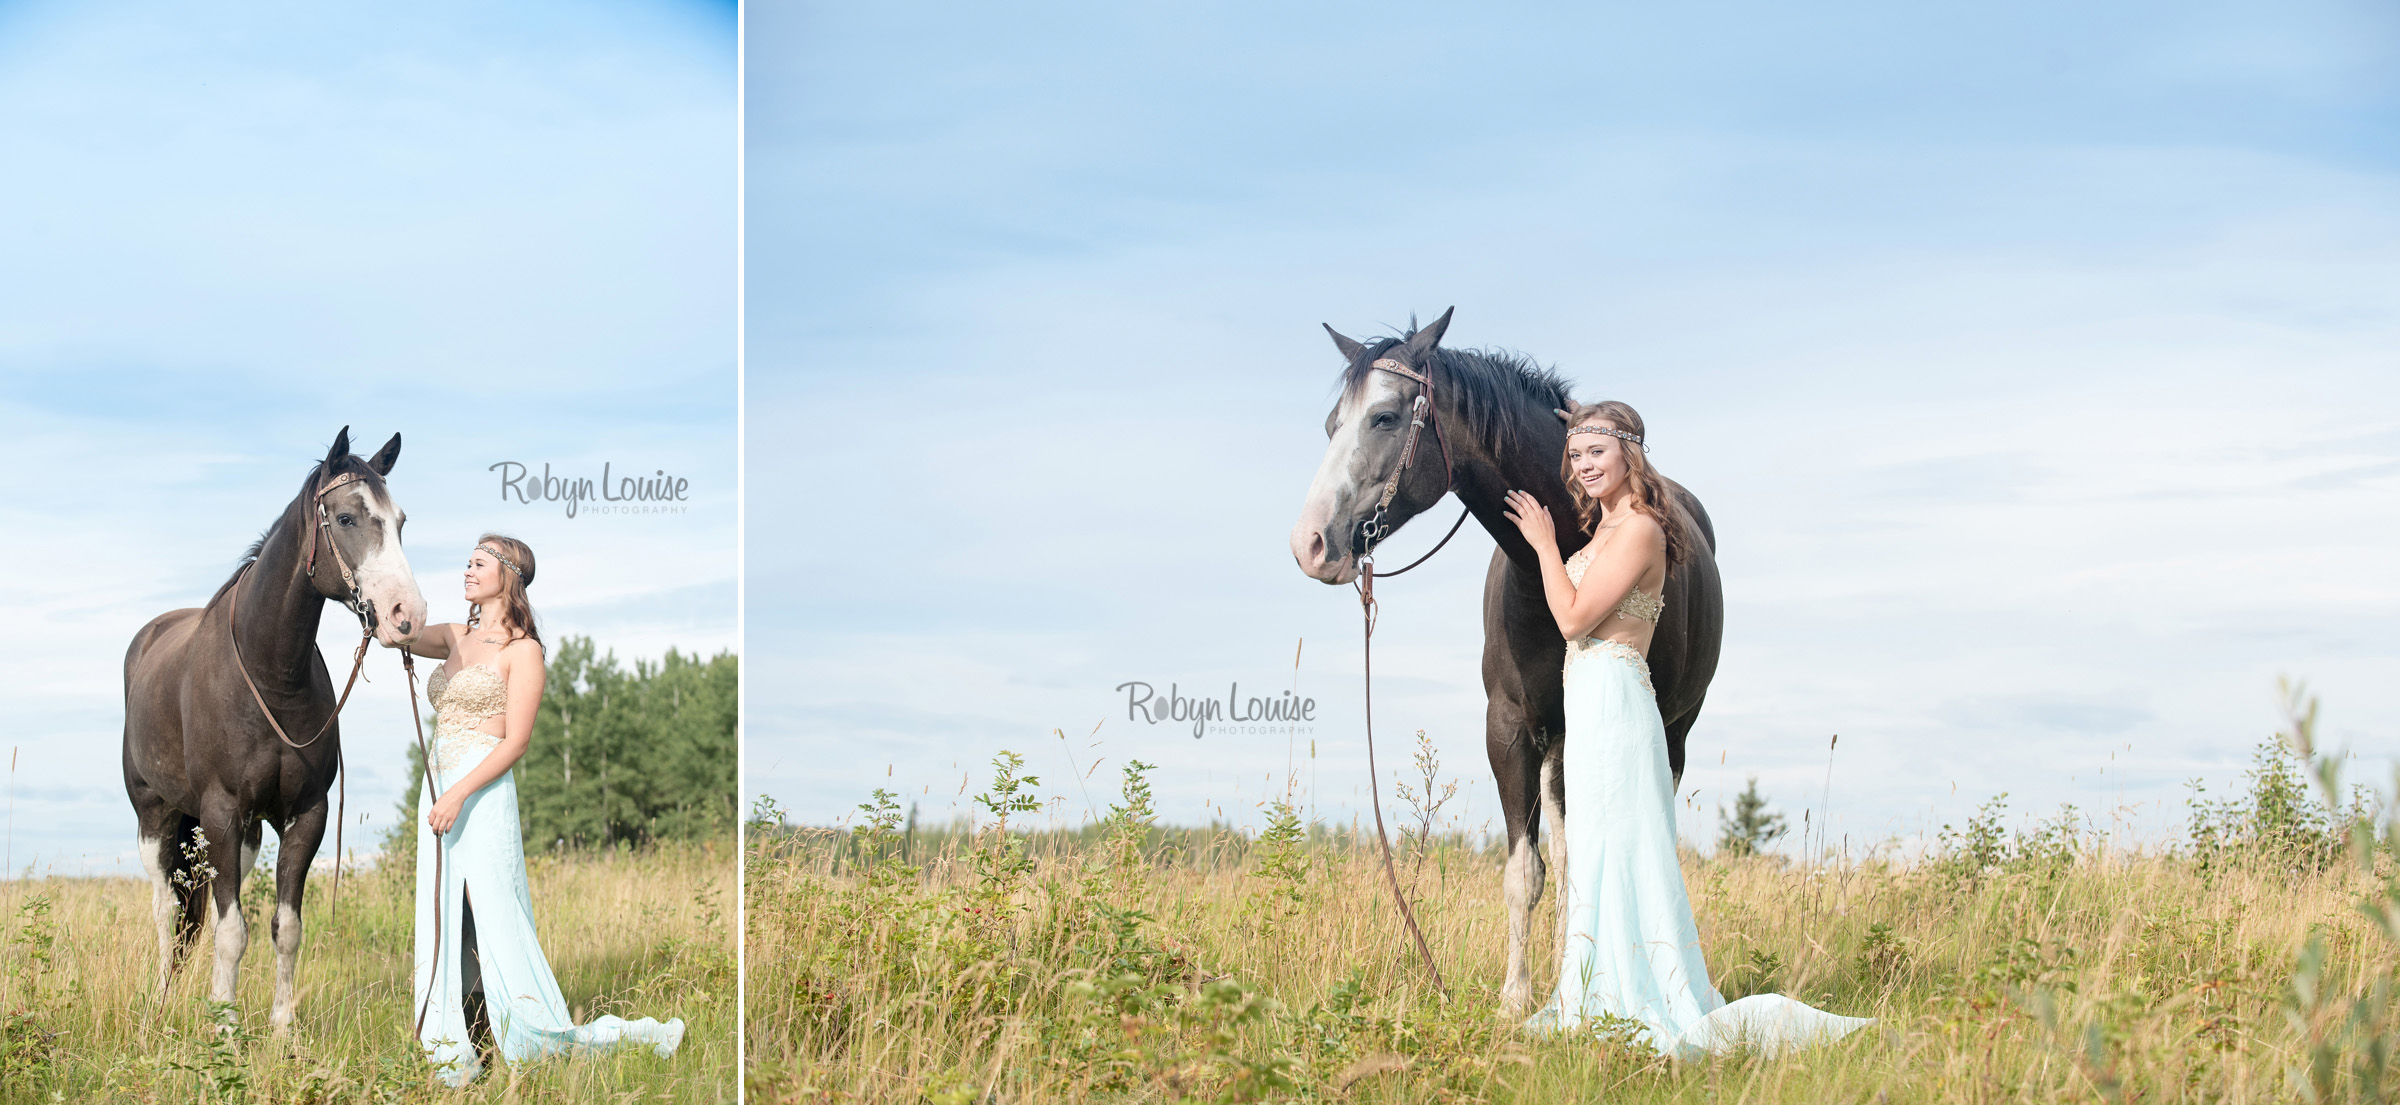 maddie-and-horses-robyn-louise-photography0002